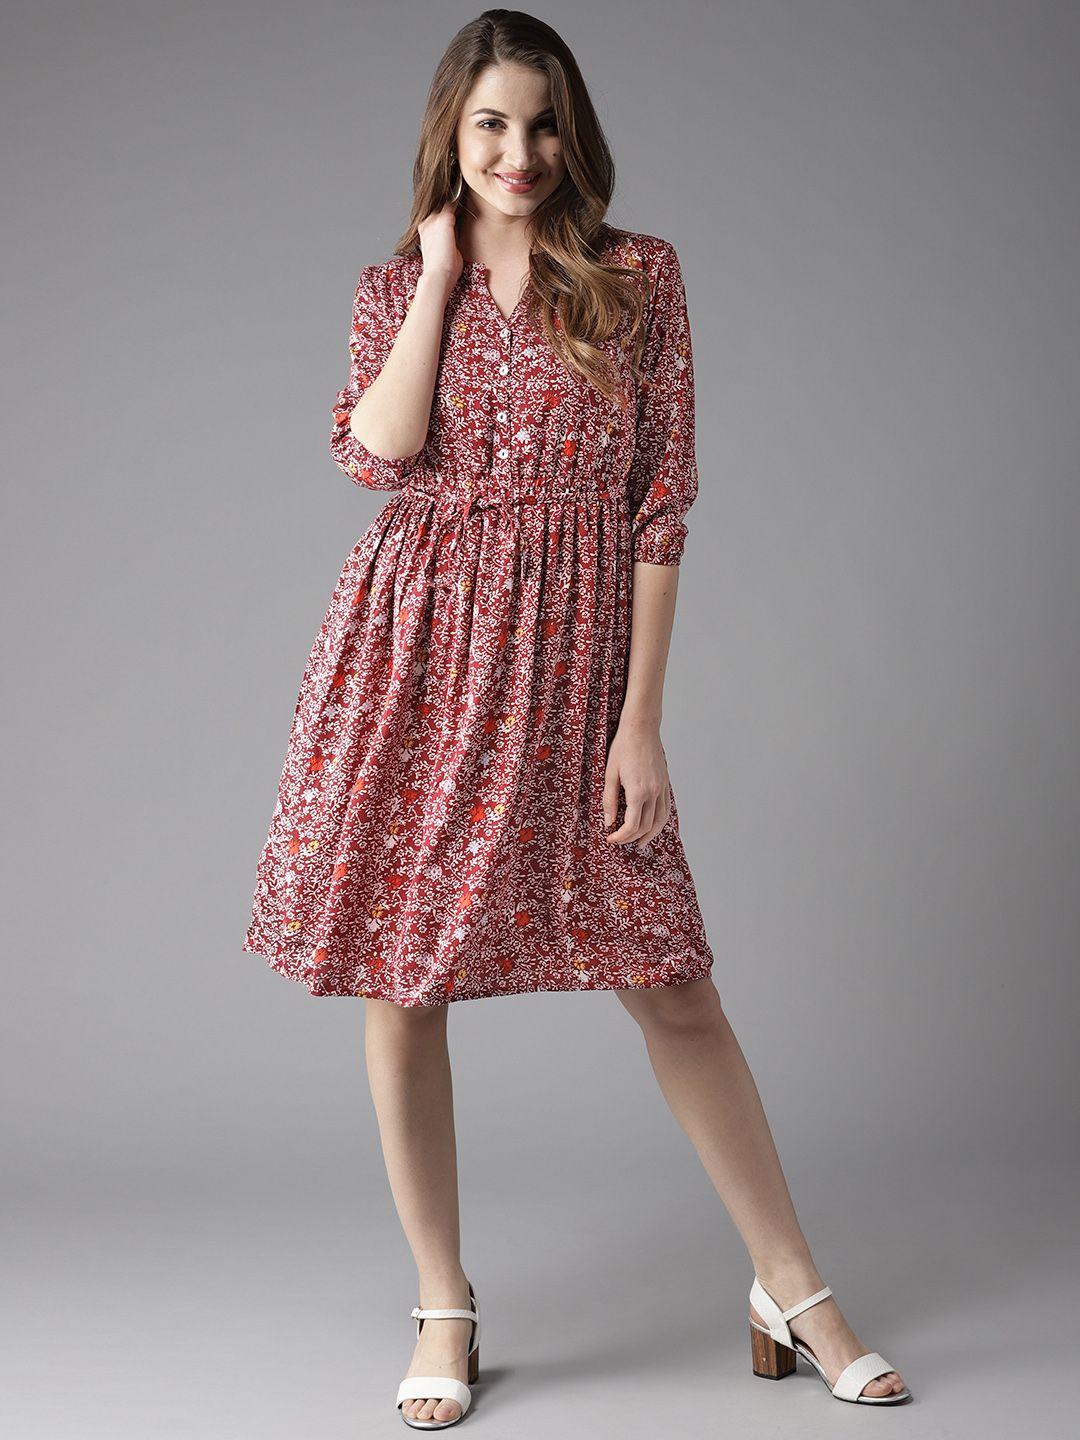 here&now women maroon floral printed fit & flare dress